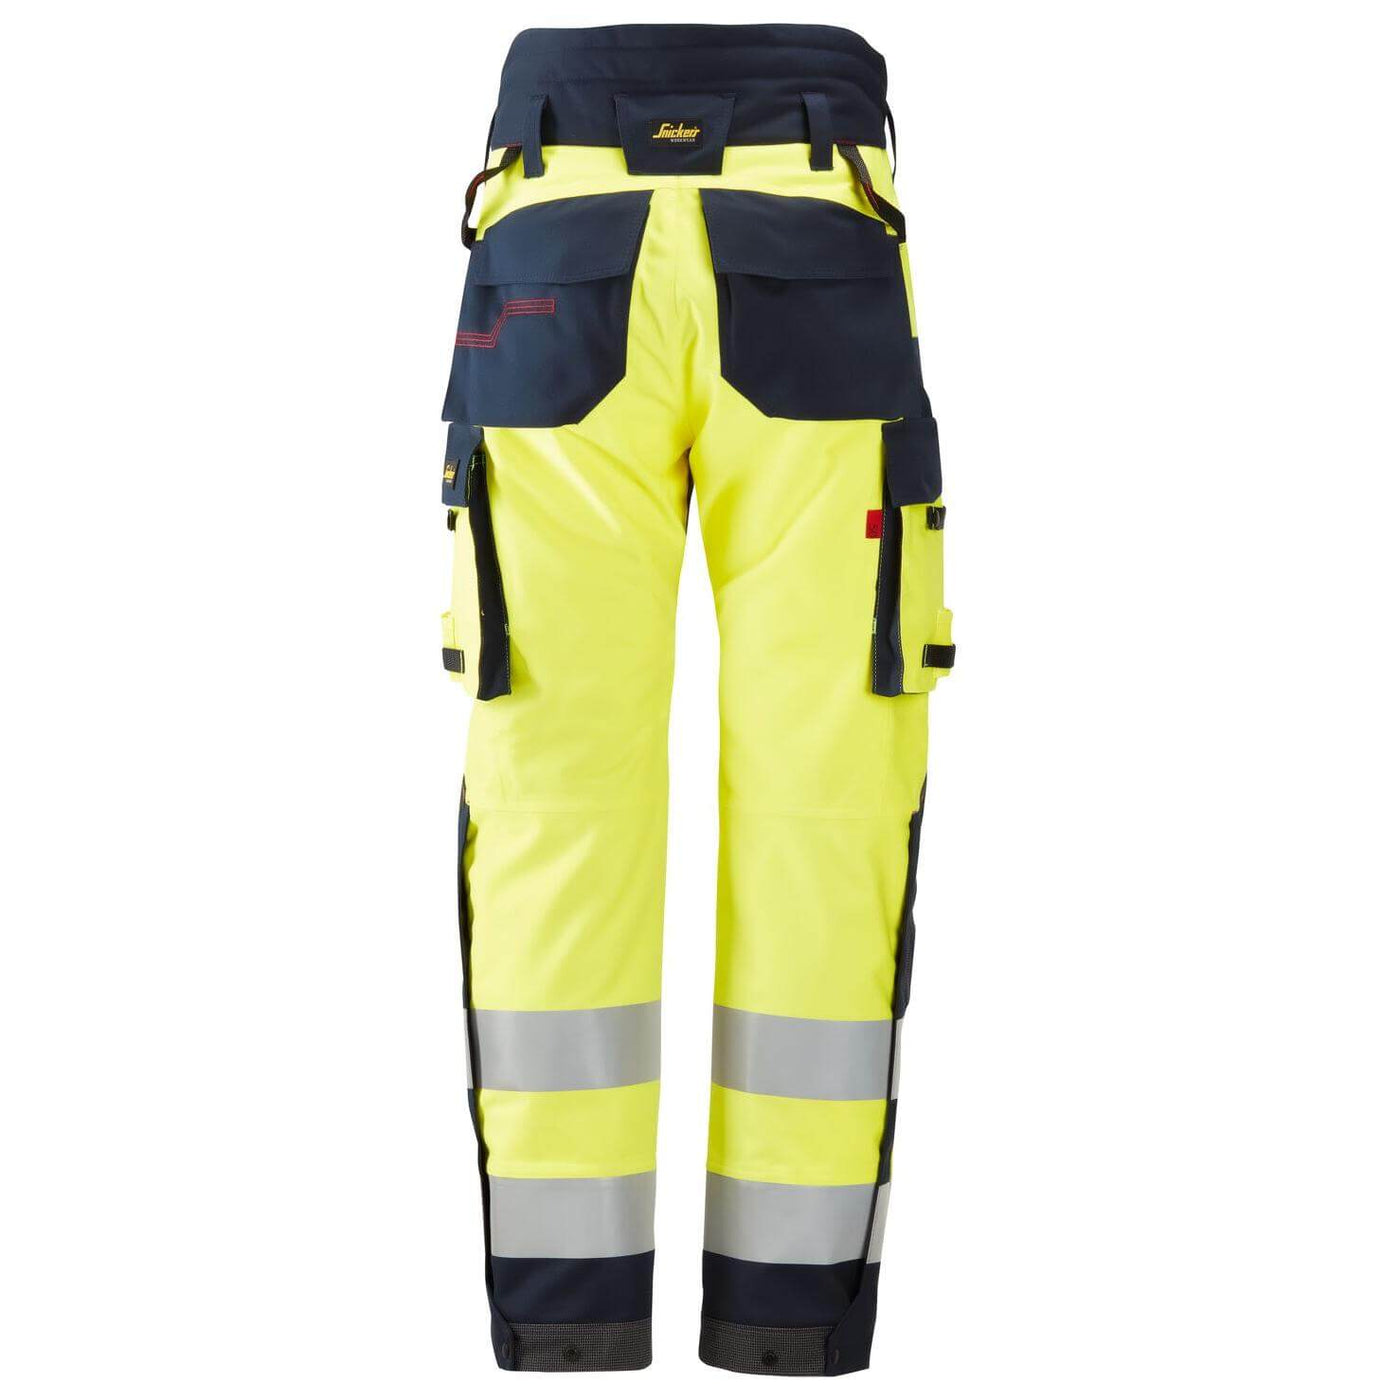 Snickers 6663 ProtecWork Hi Vis Insulated Winter Trousers Class 2 Hi Vis Yellow Navy Blue back #colour_hi-vis-yellow-navy-blue